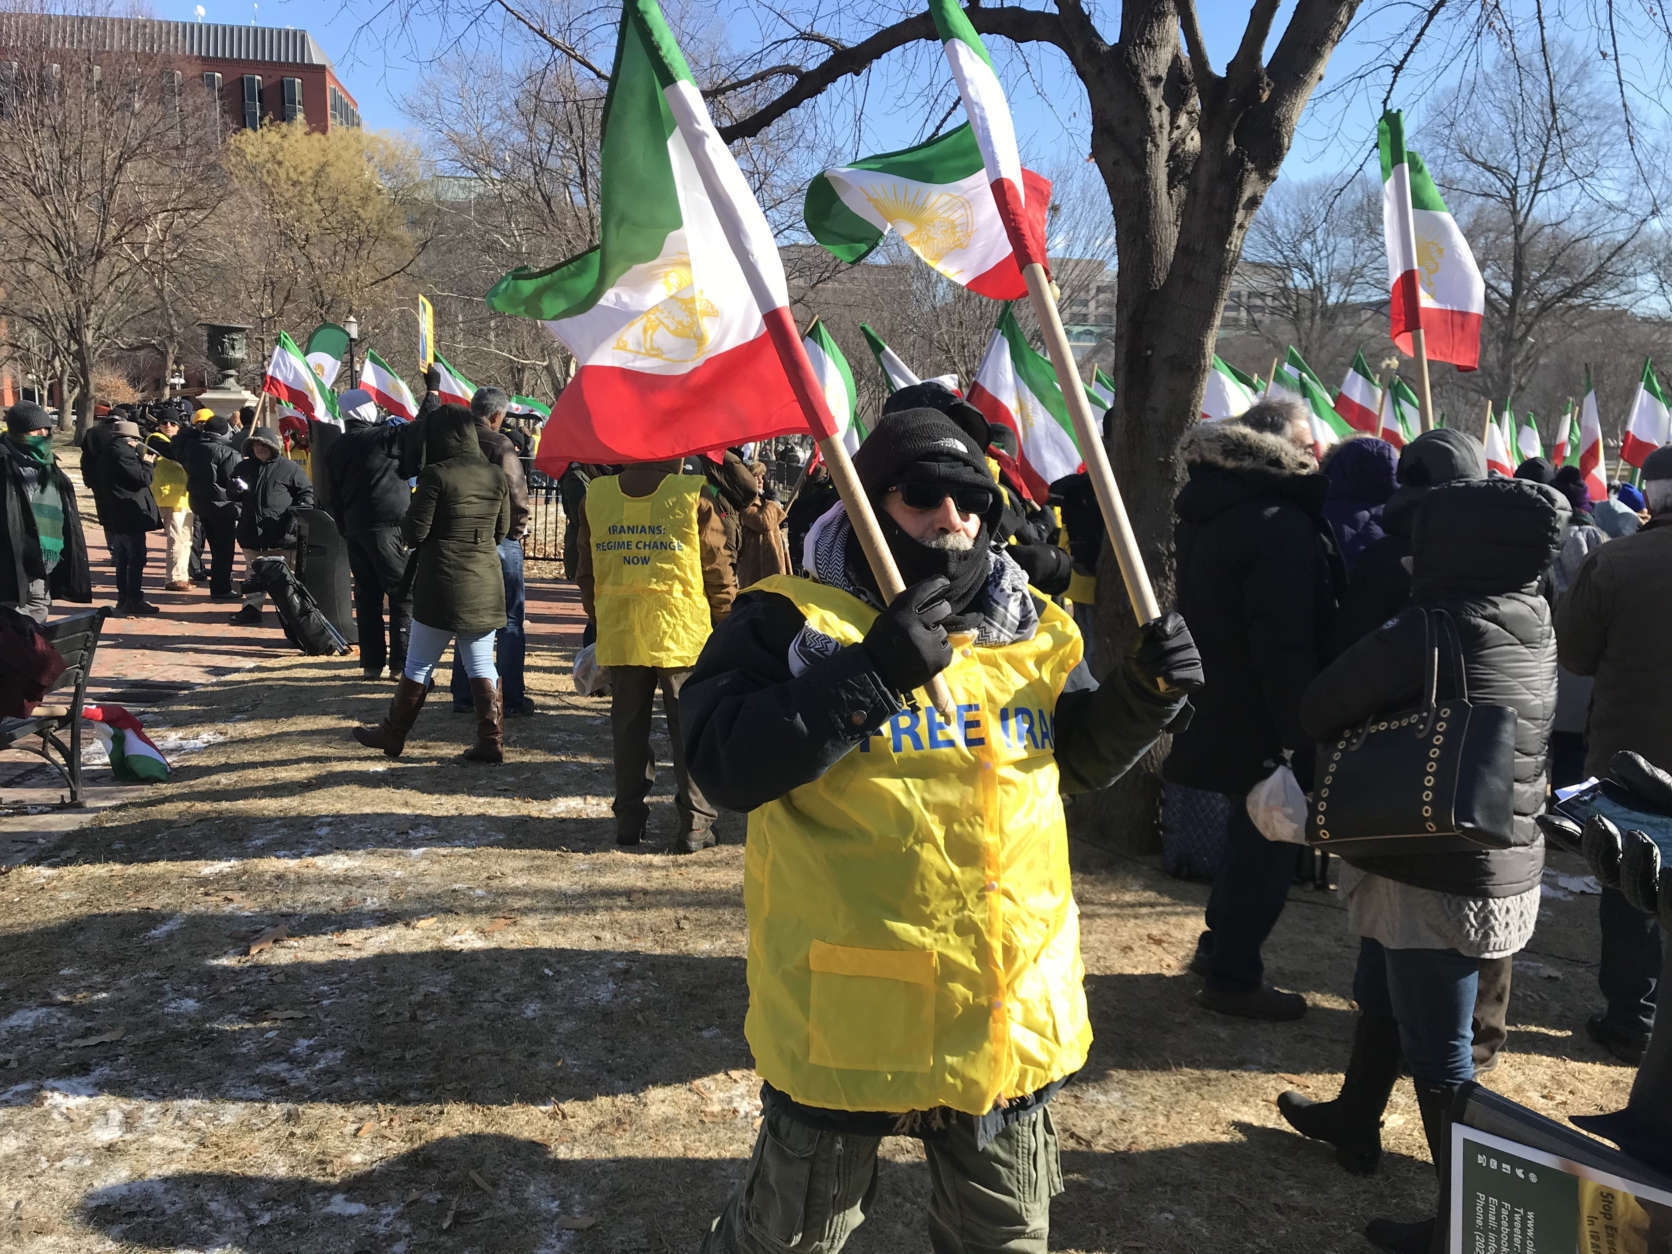 The demonstrators waved flags including the flag of the Shah, or king, who was overthrown by Iran's current regime. (WTOP/Dick Uliano) 